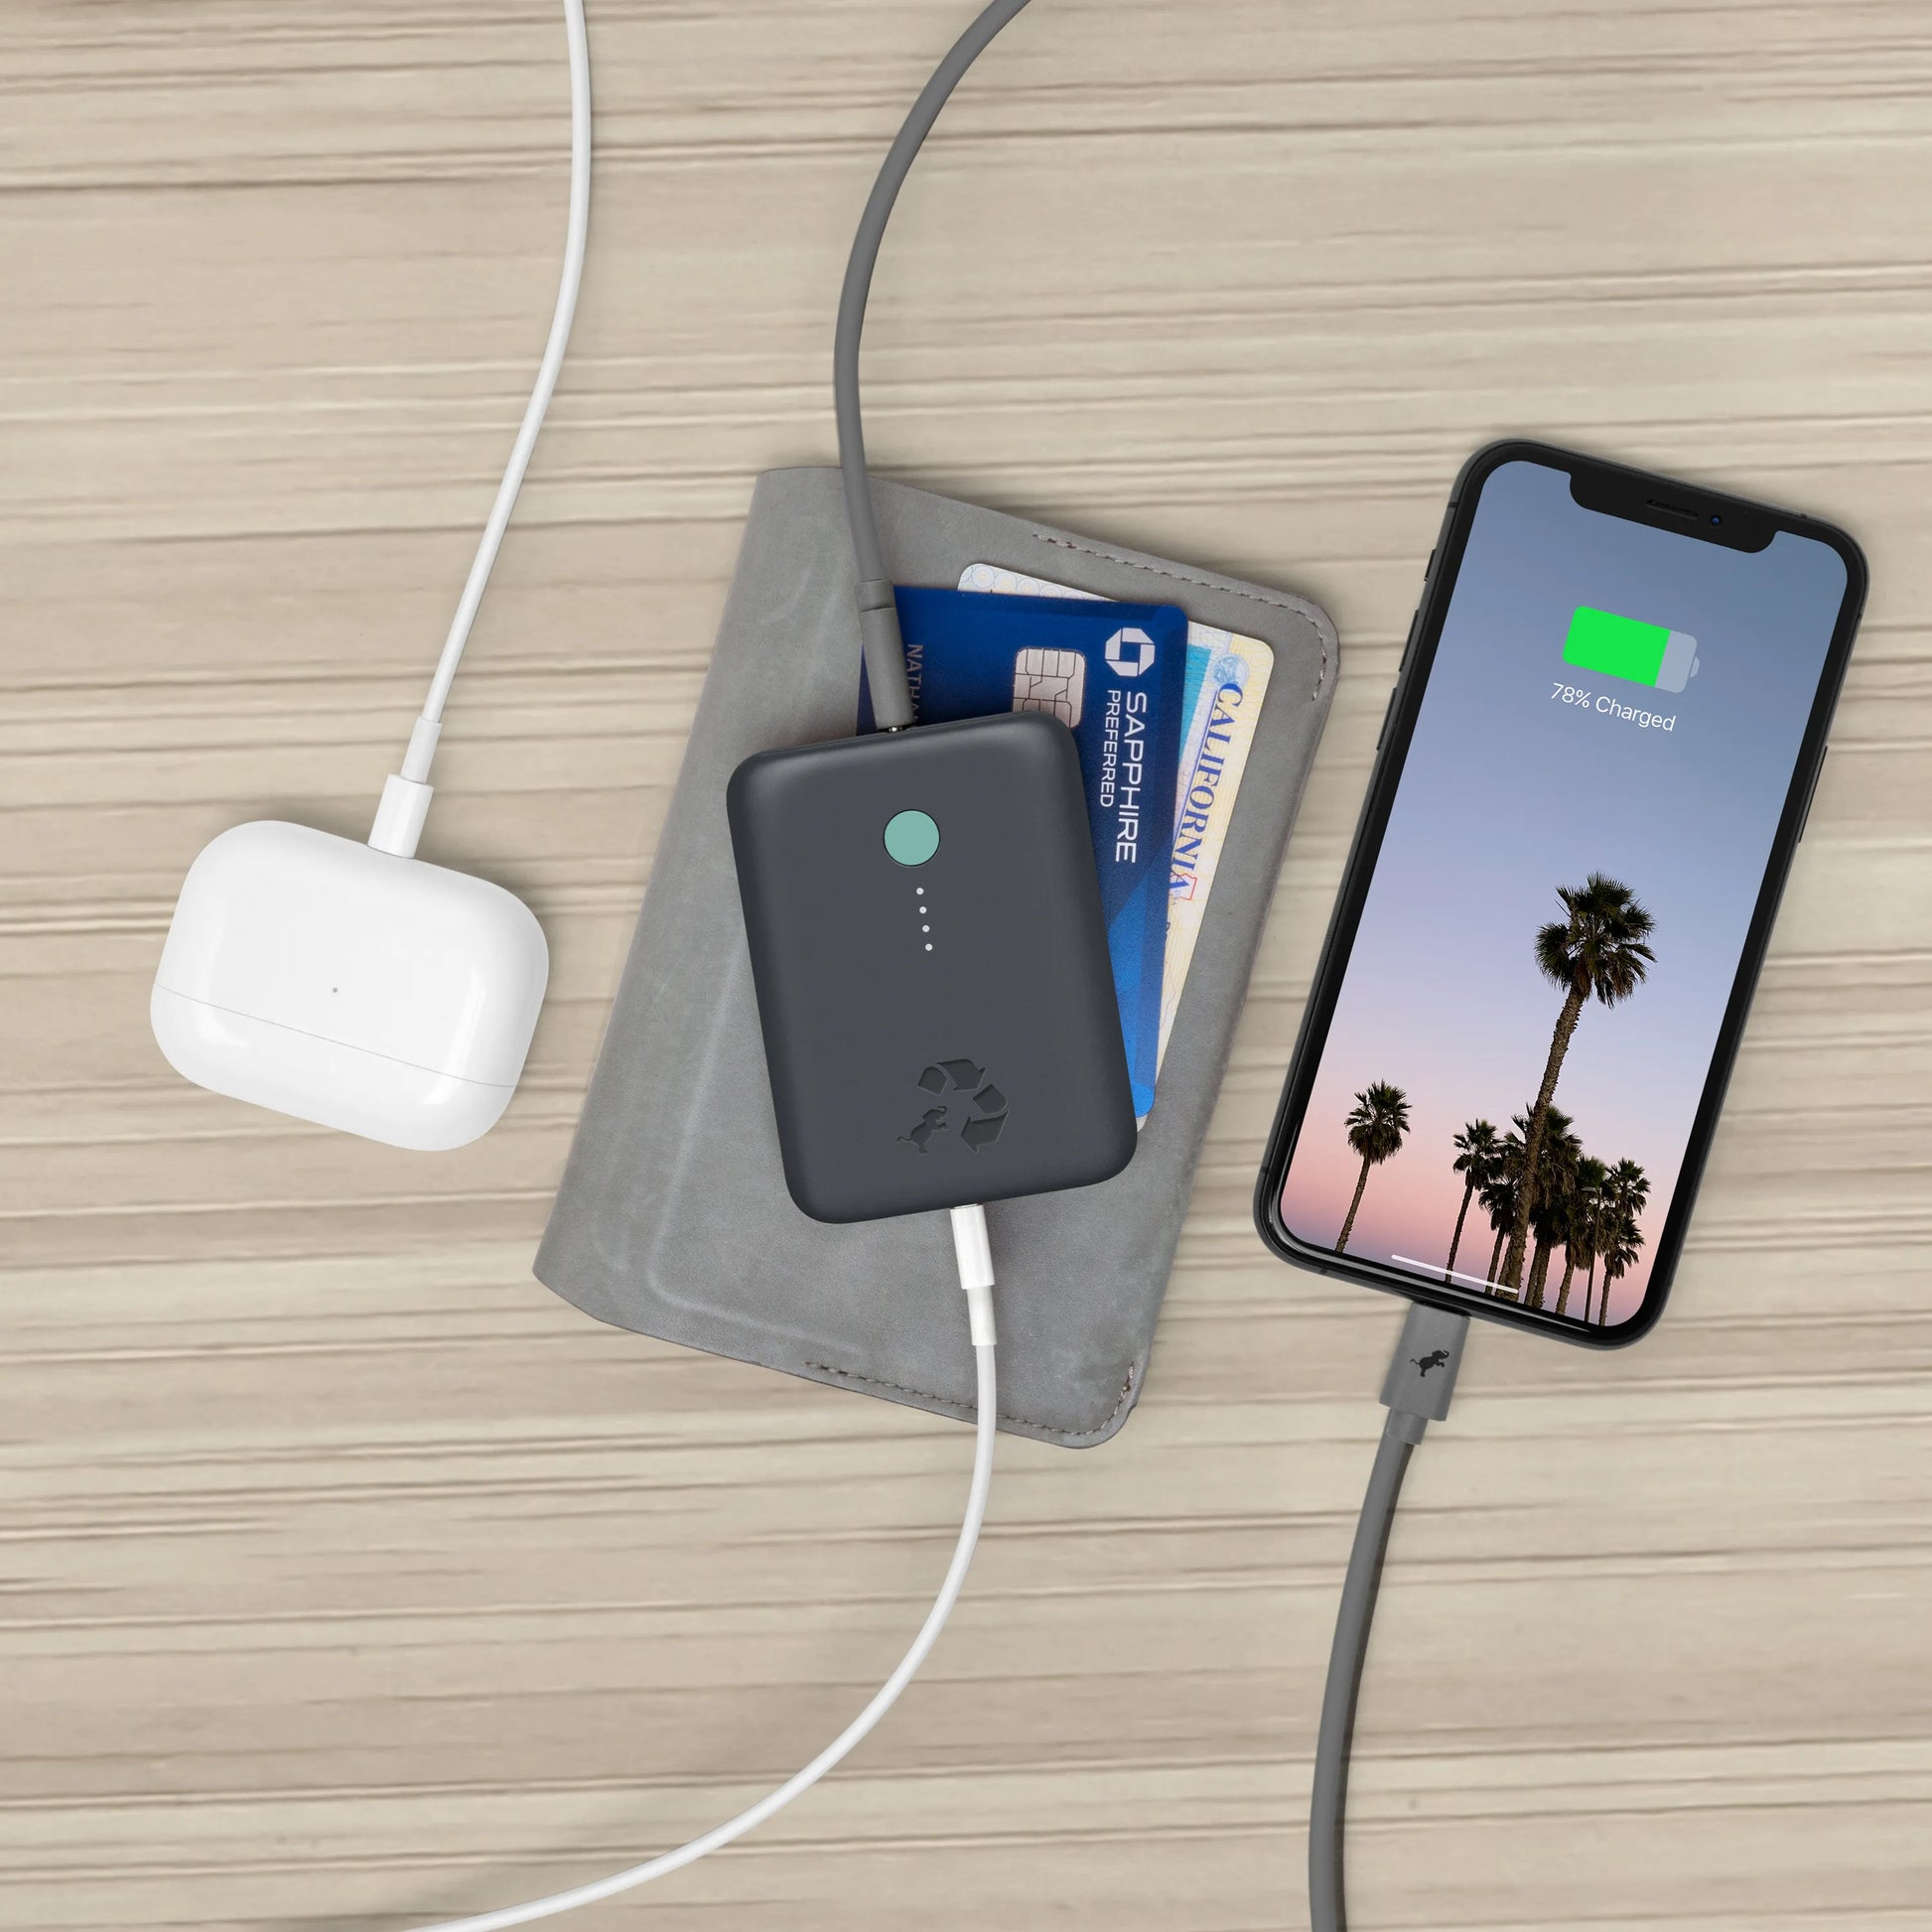 Charcoal portable charger with green button connected to airpods and cell phone.